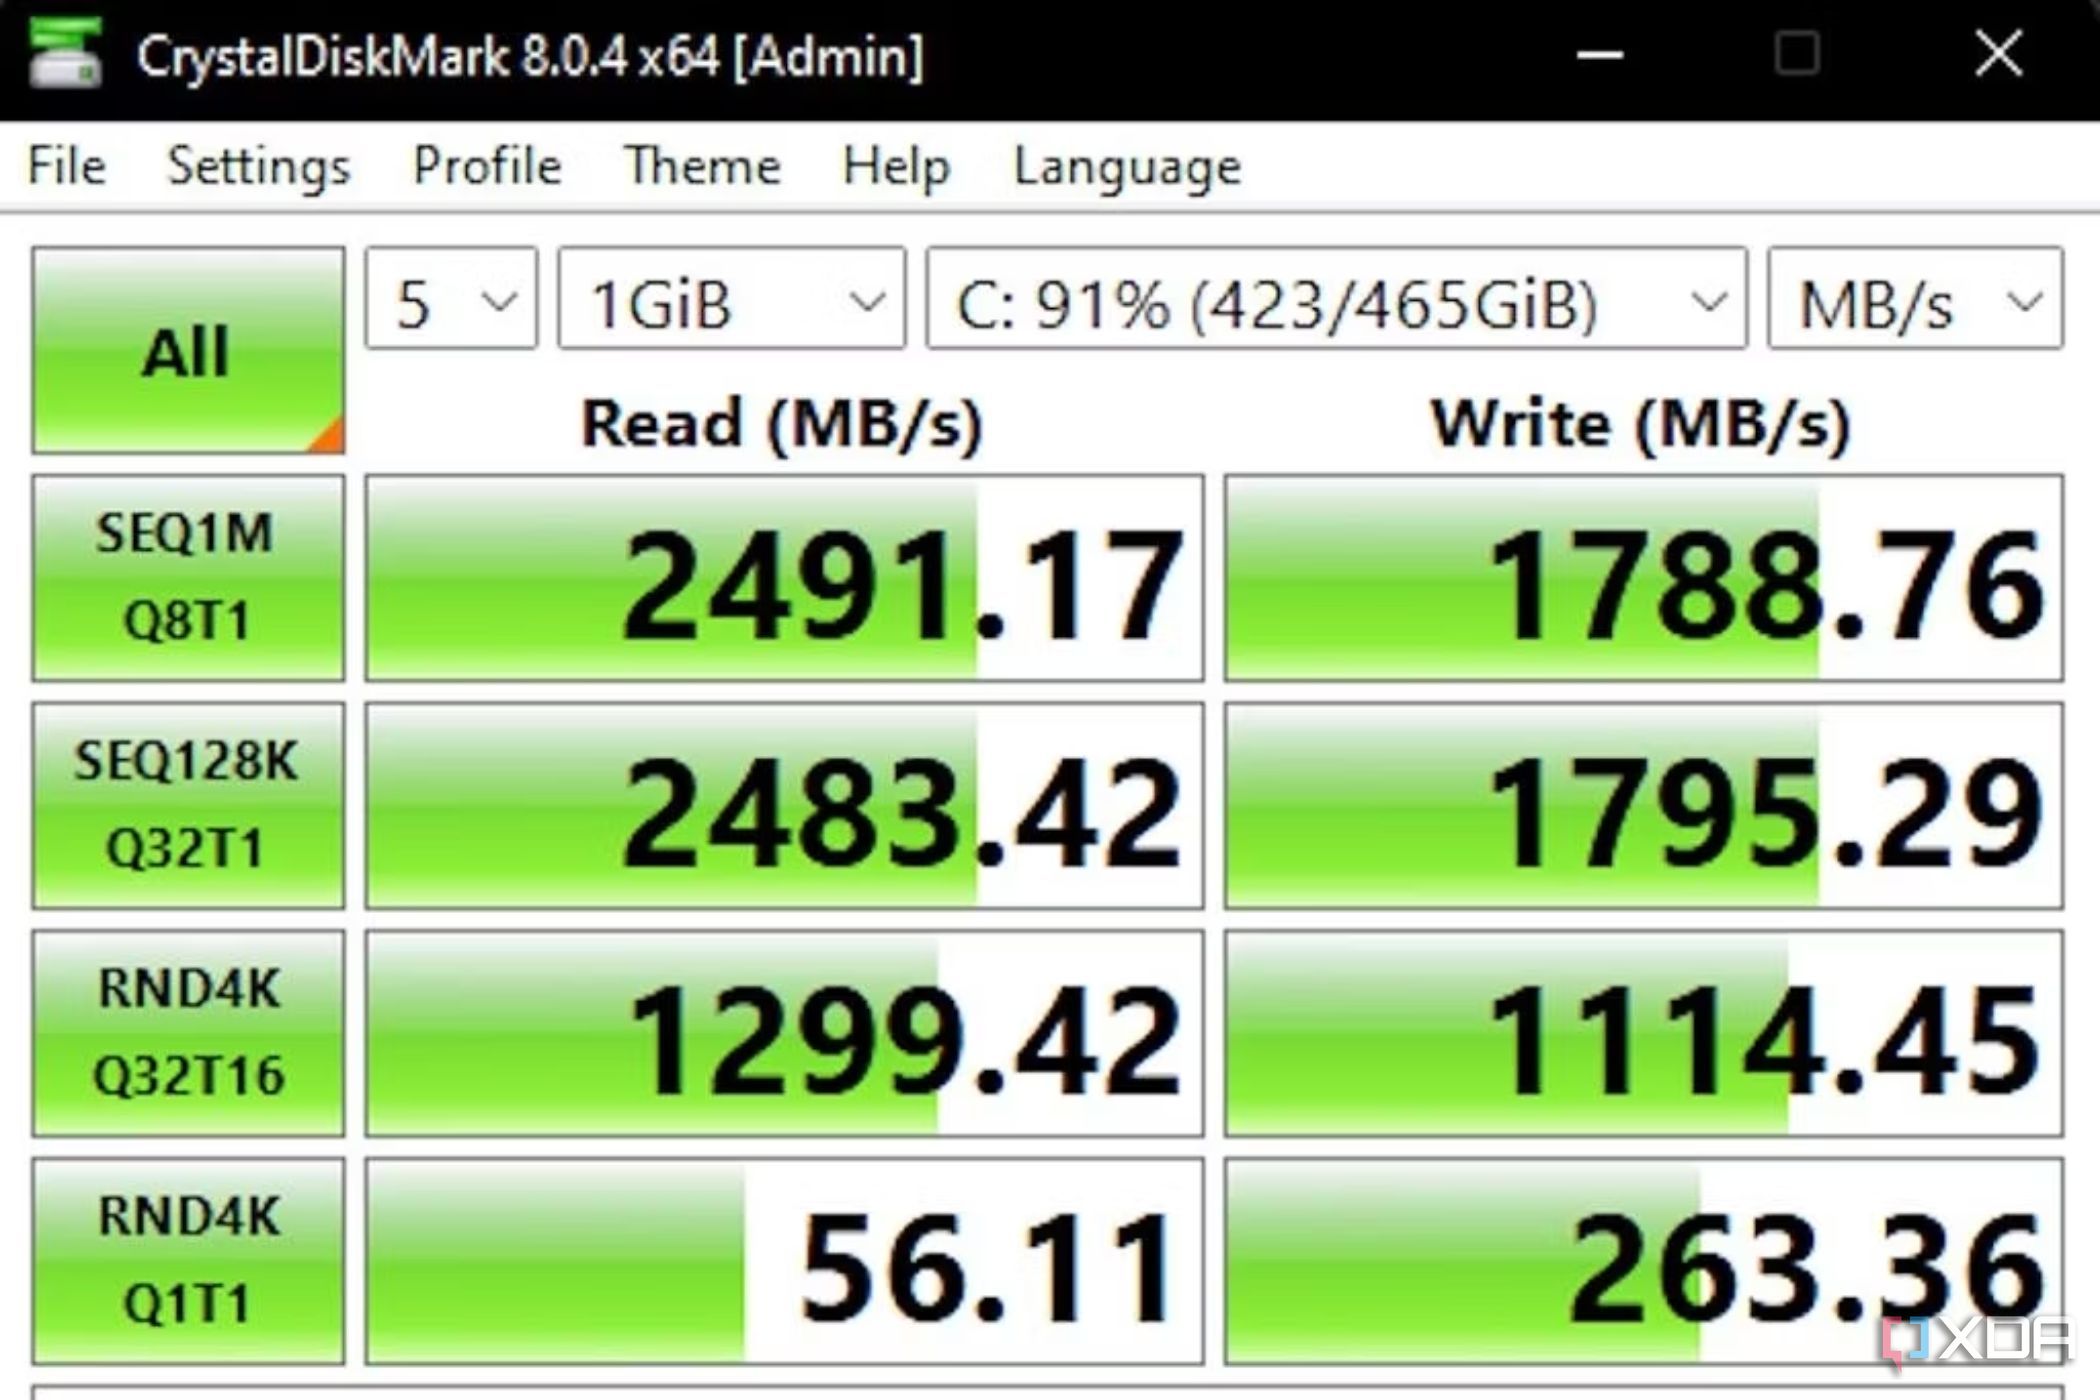 A screenshot showing CrystalDiskMark test results for a PCIe 3.0 SSD.